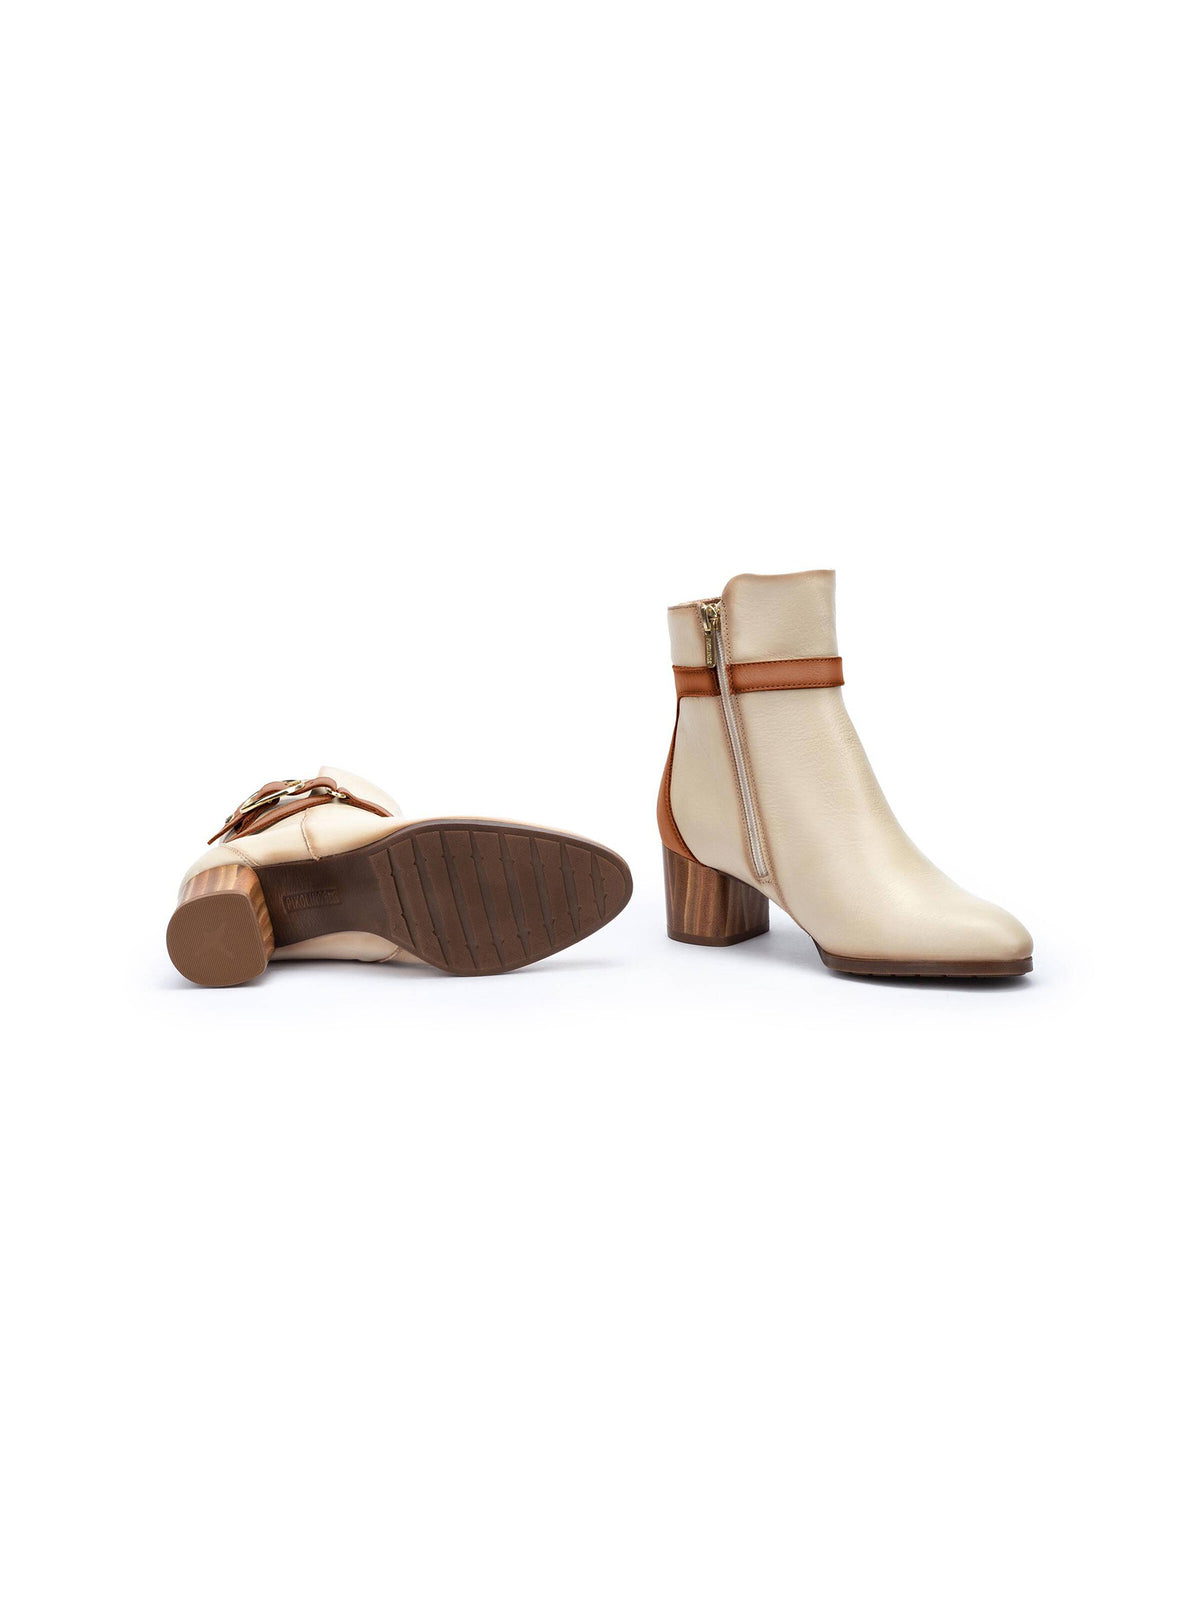 pikolinos calafat heeled ankle boots in marfil cream with light tan buckle